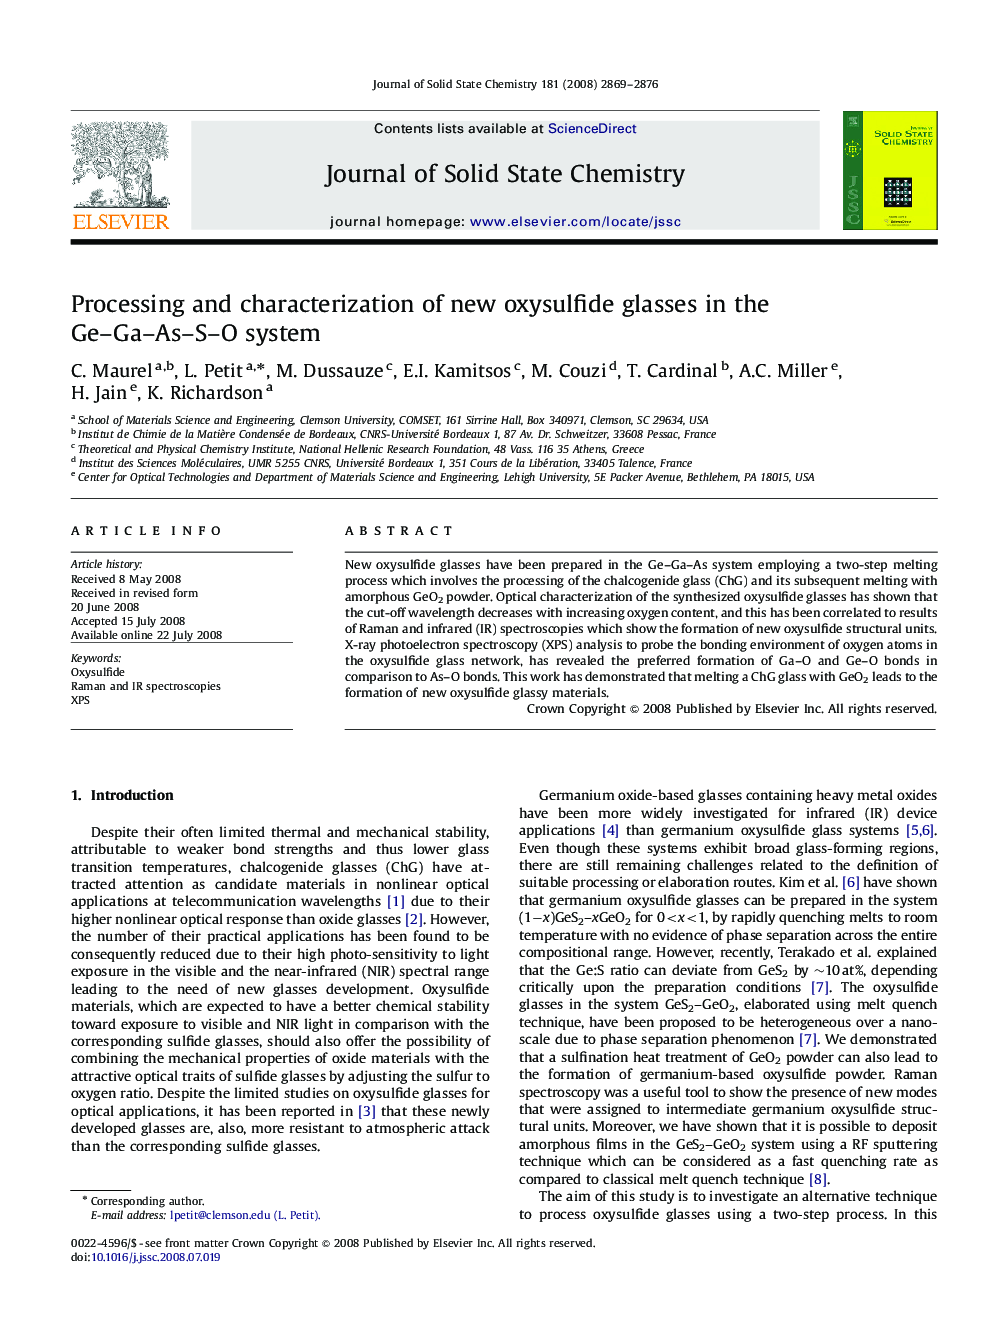 Processing and characterization of new oxysulfide glasses in the Ge–Ga–As–S–O system